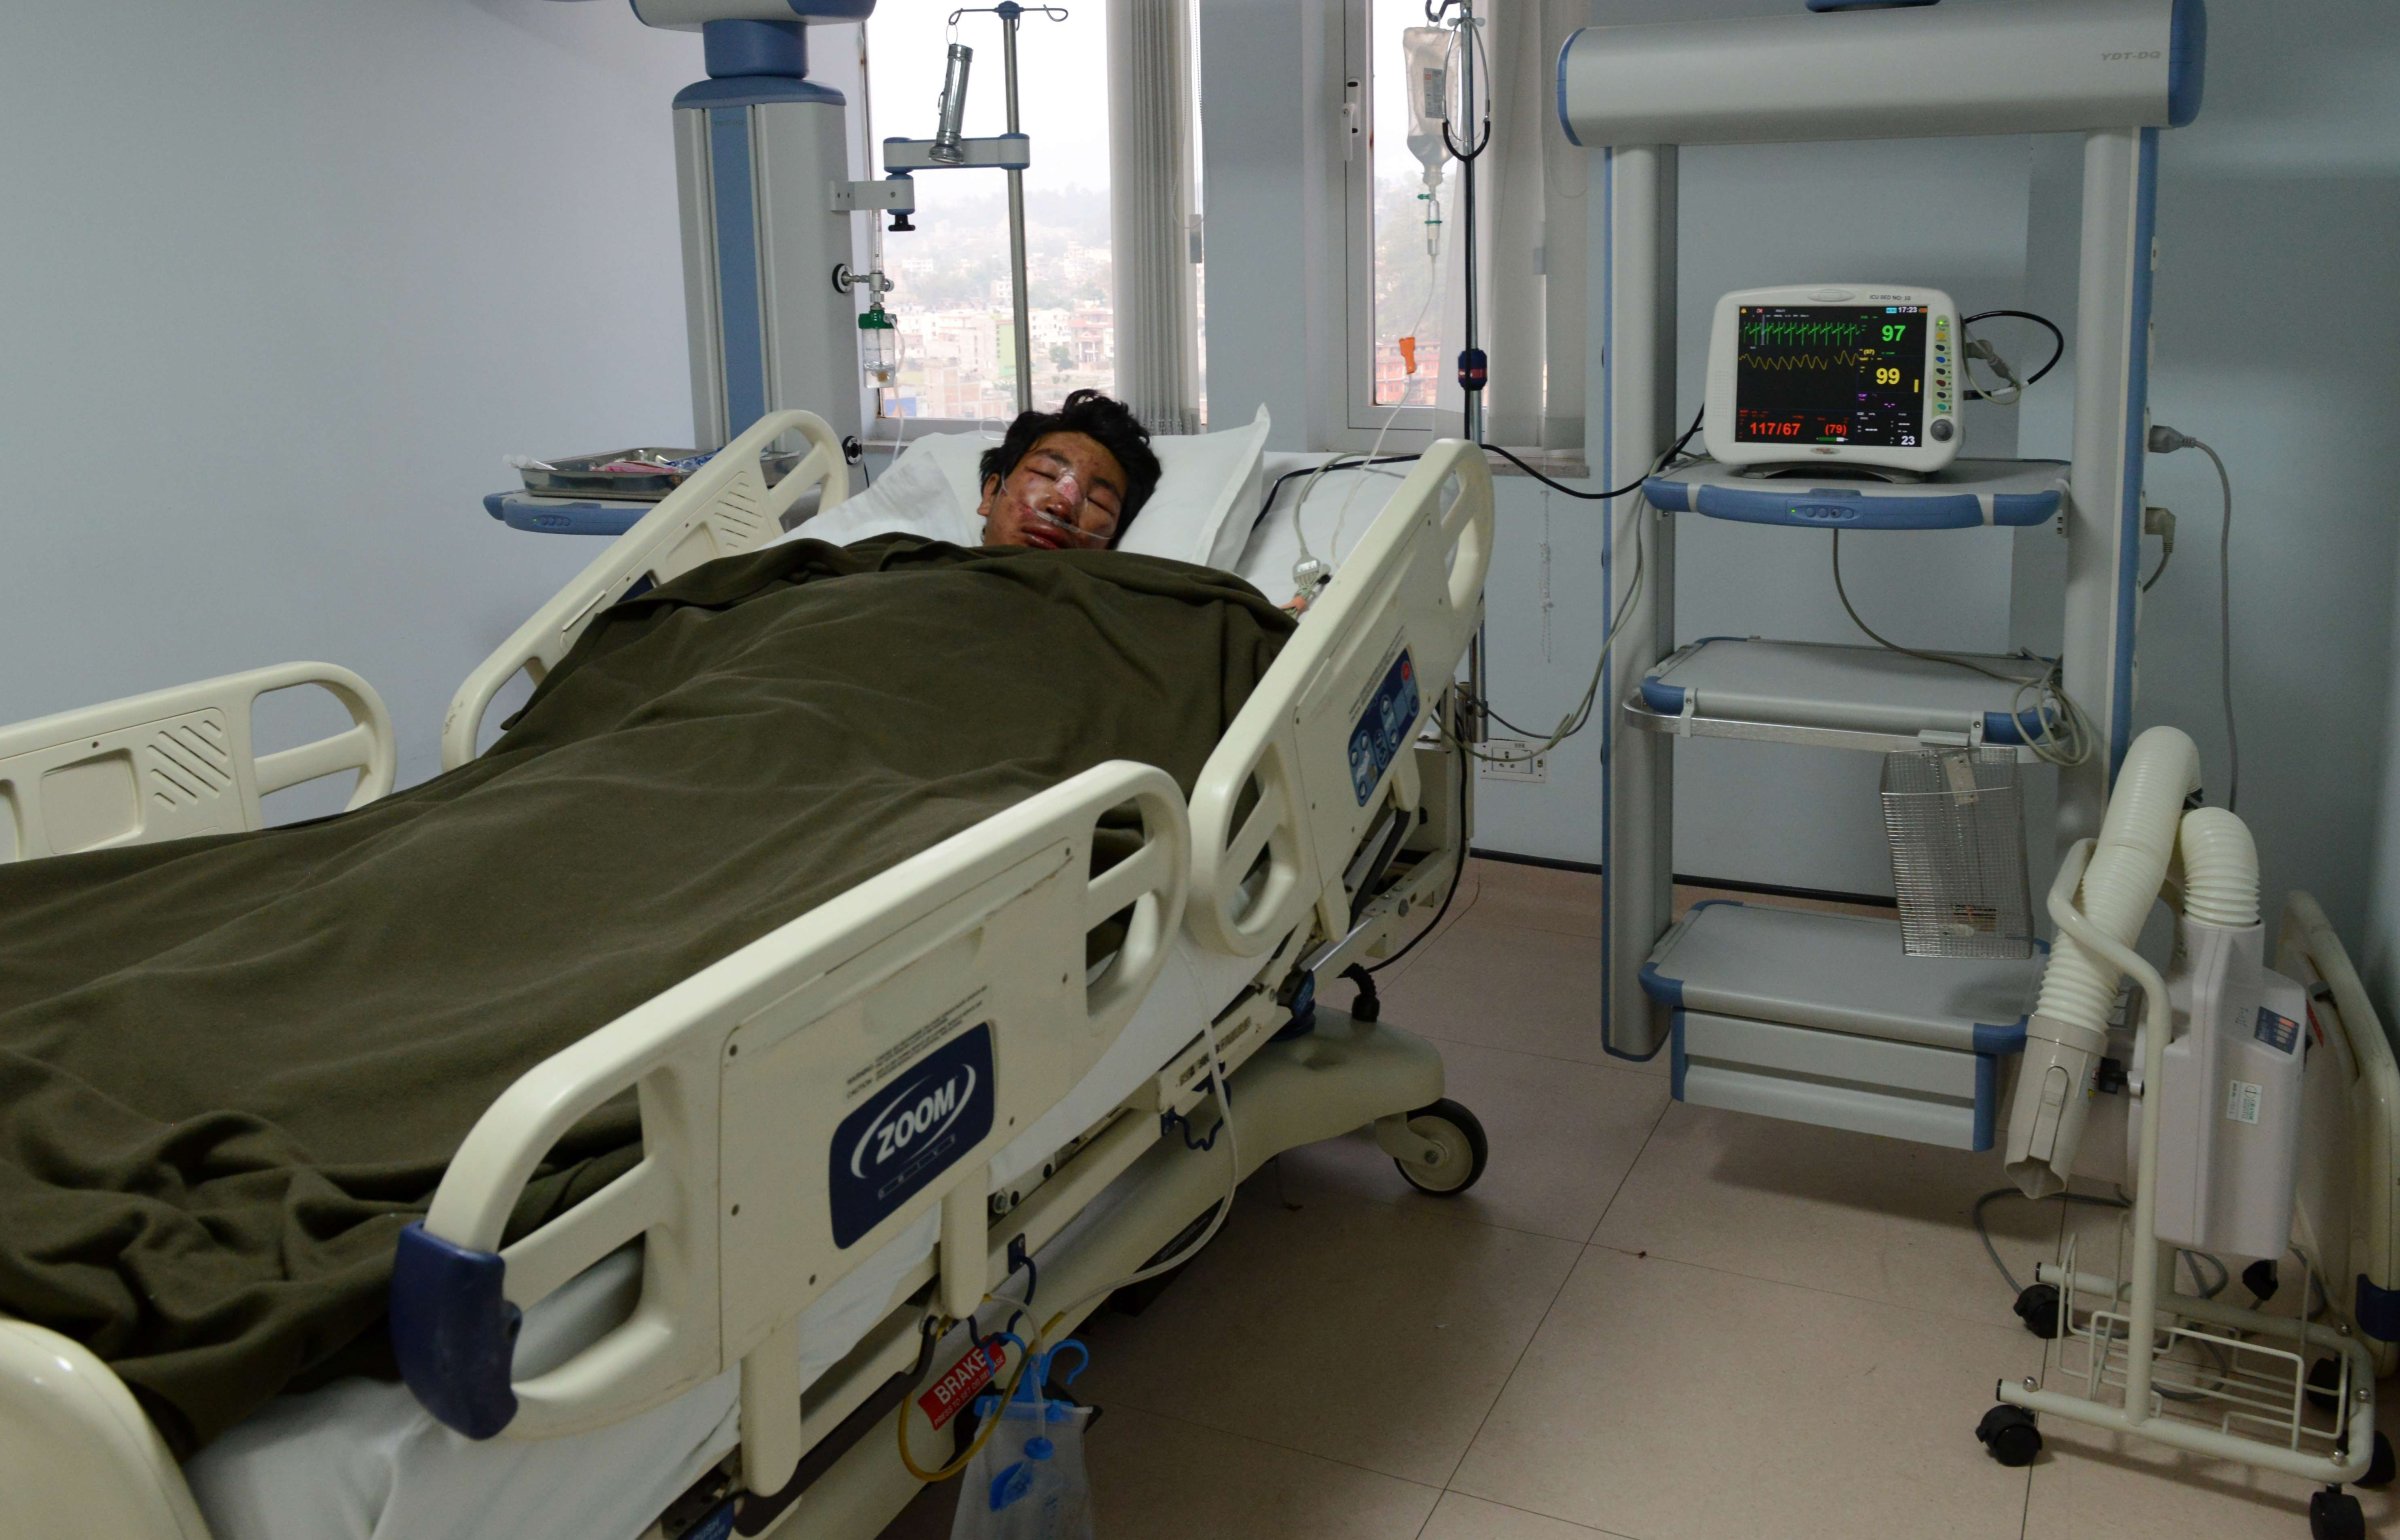 Nepalese mountaineer, Dawa Tashi Sherpa, survivor of the avalanche on Mount Everest, lies in the Intensive Care Unit (ICU) at Grandi International Hospital in Kathmandu on April 18, 2014.